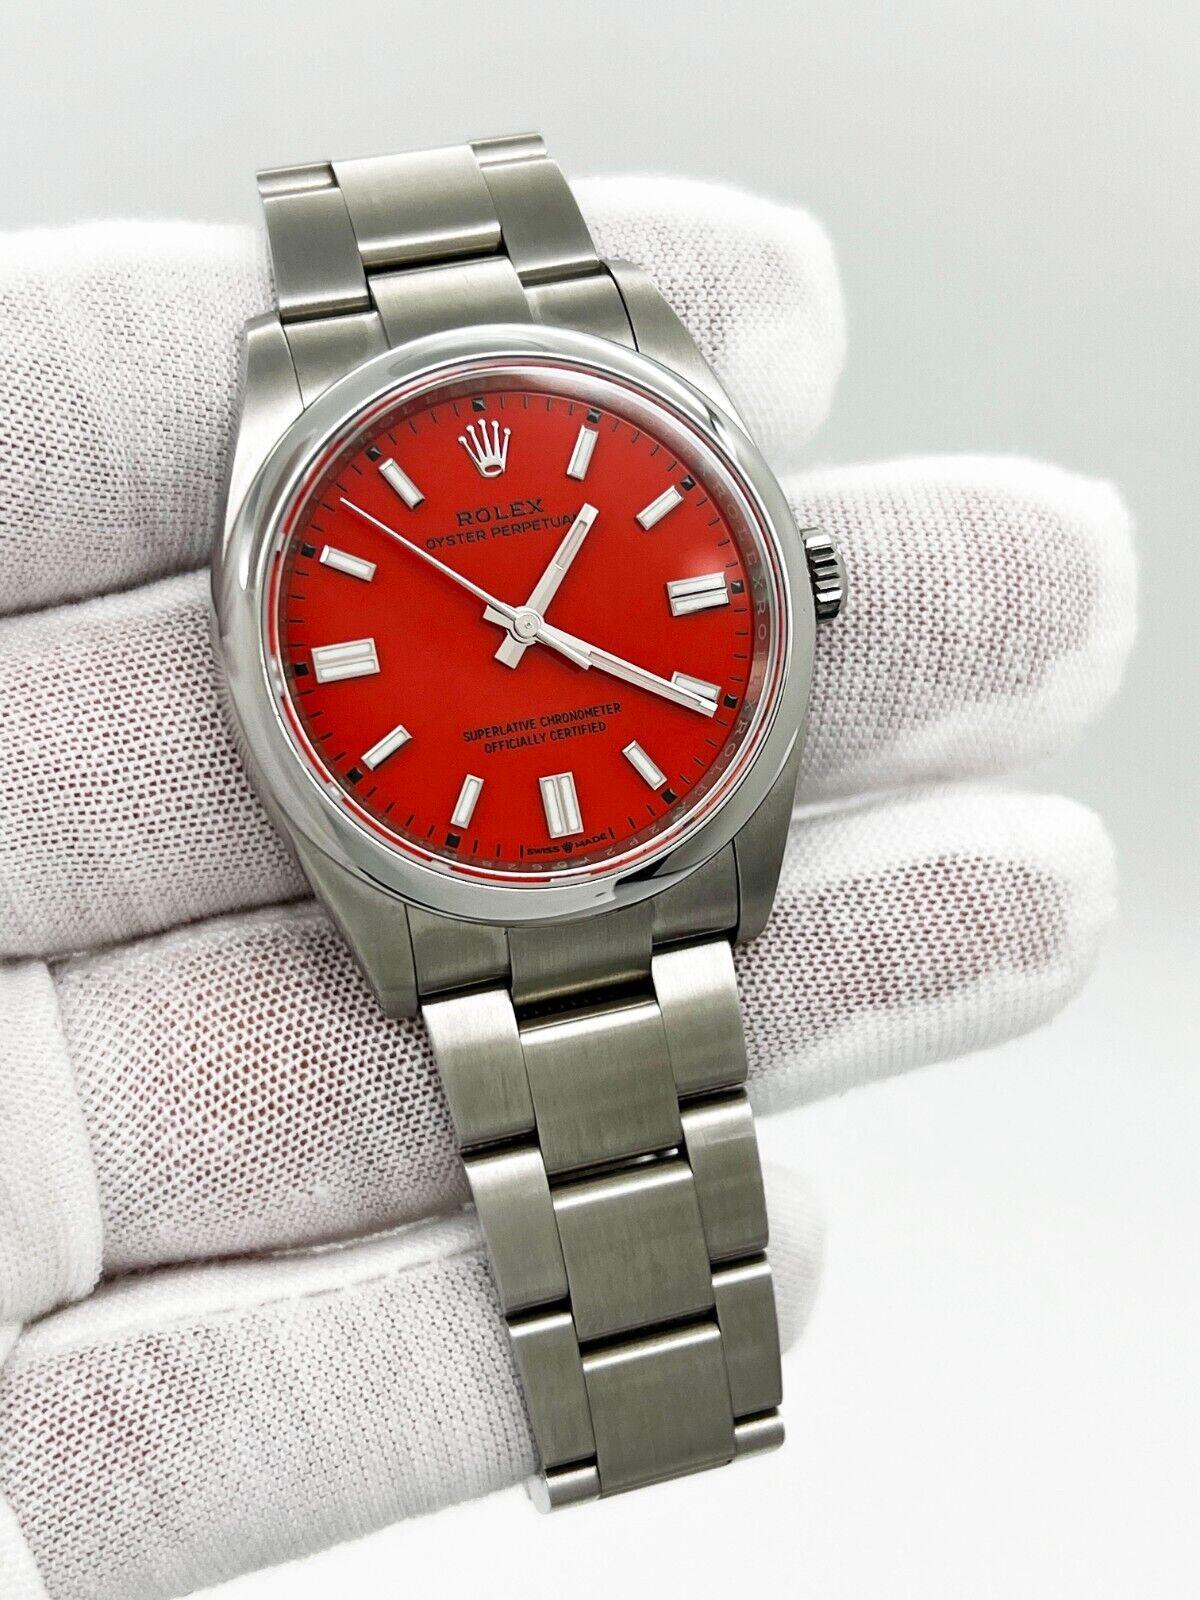 Style Number: 126000



Serial: 2P2Y5***



Year: 2022

 

Model: Oyster Perpetual 

 

Case Material: Stainless Steel 

 

Band: Stainless Steel 

 

Bezel: Stainless Steel 

 

Dial: Factory Original  Red Coral 

 

Face: Sapphire Crystal 

